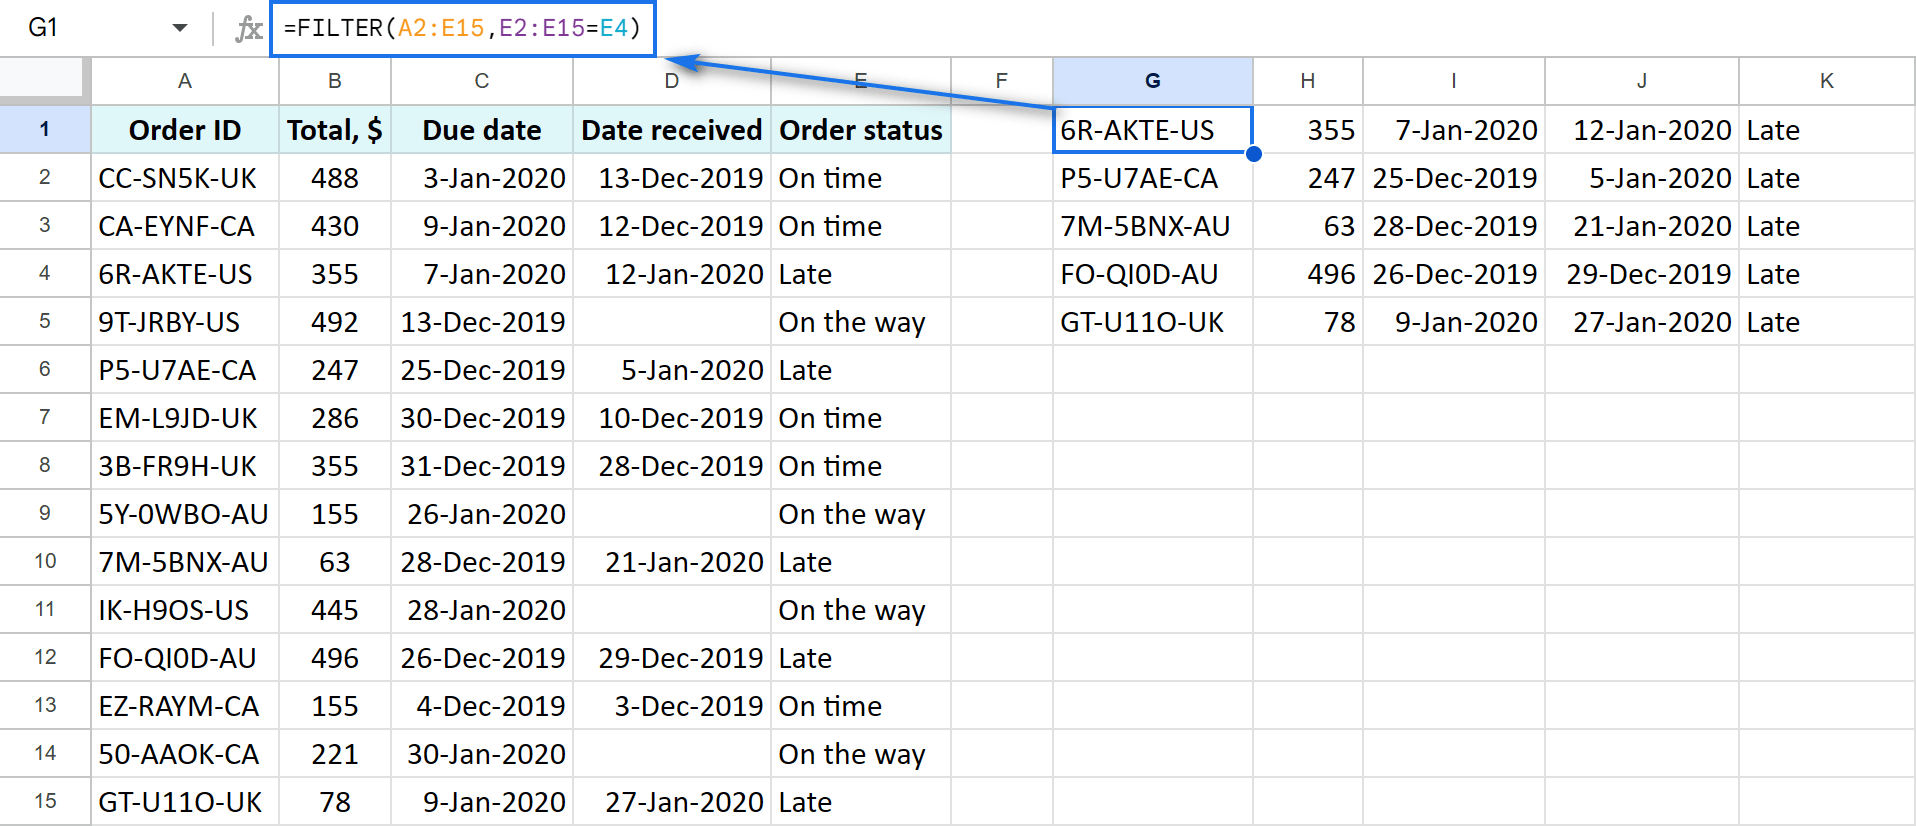 Reference criteria cells in the Google Sheets FILTER function.